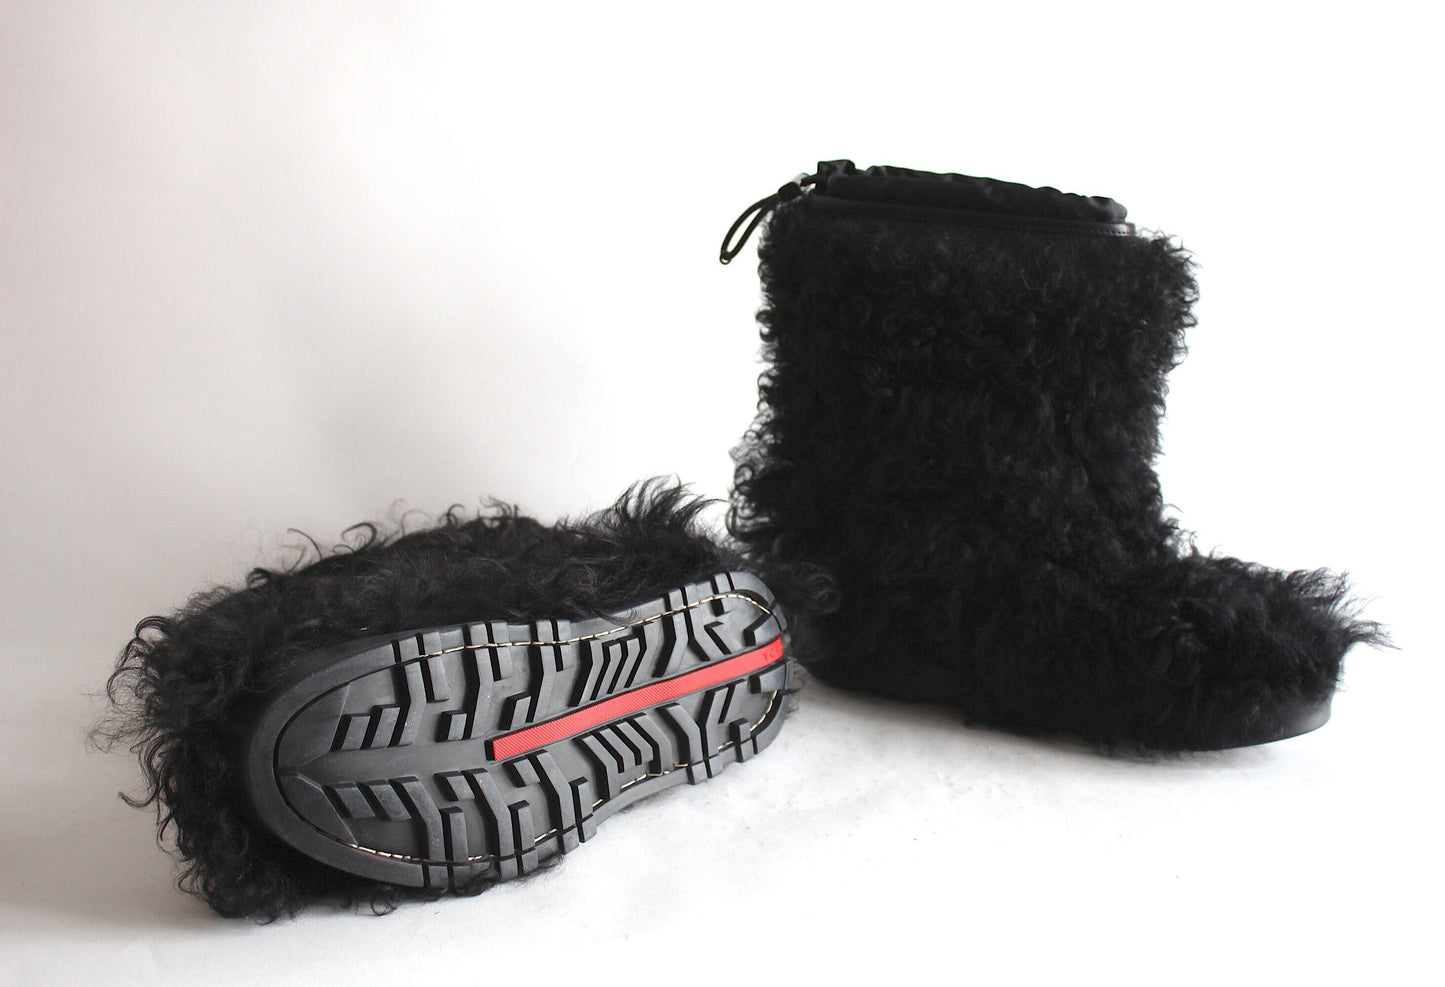 Vintage Glam: Prada Sport Curly Hair Après-Ski Boots from the Early 2000s